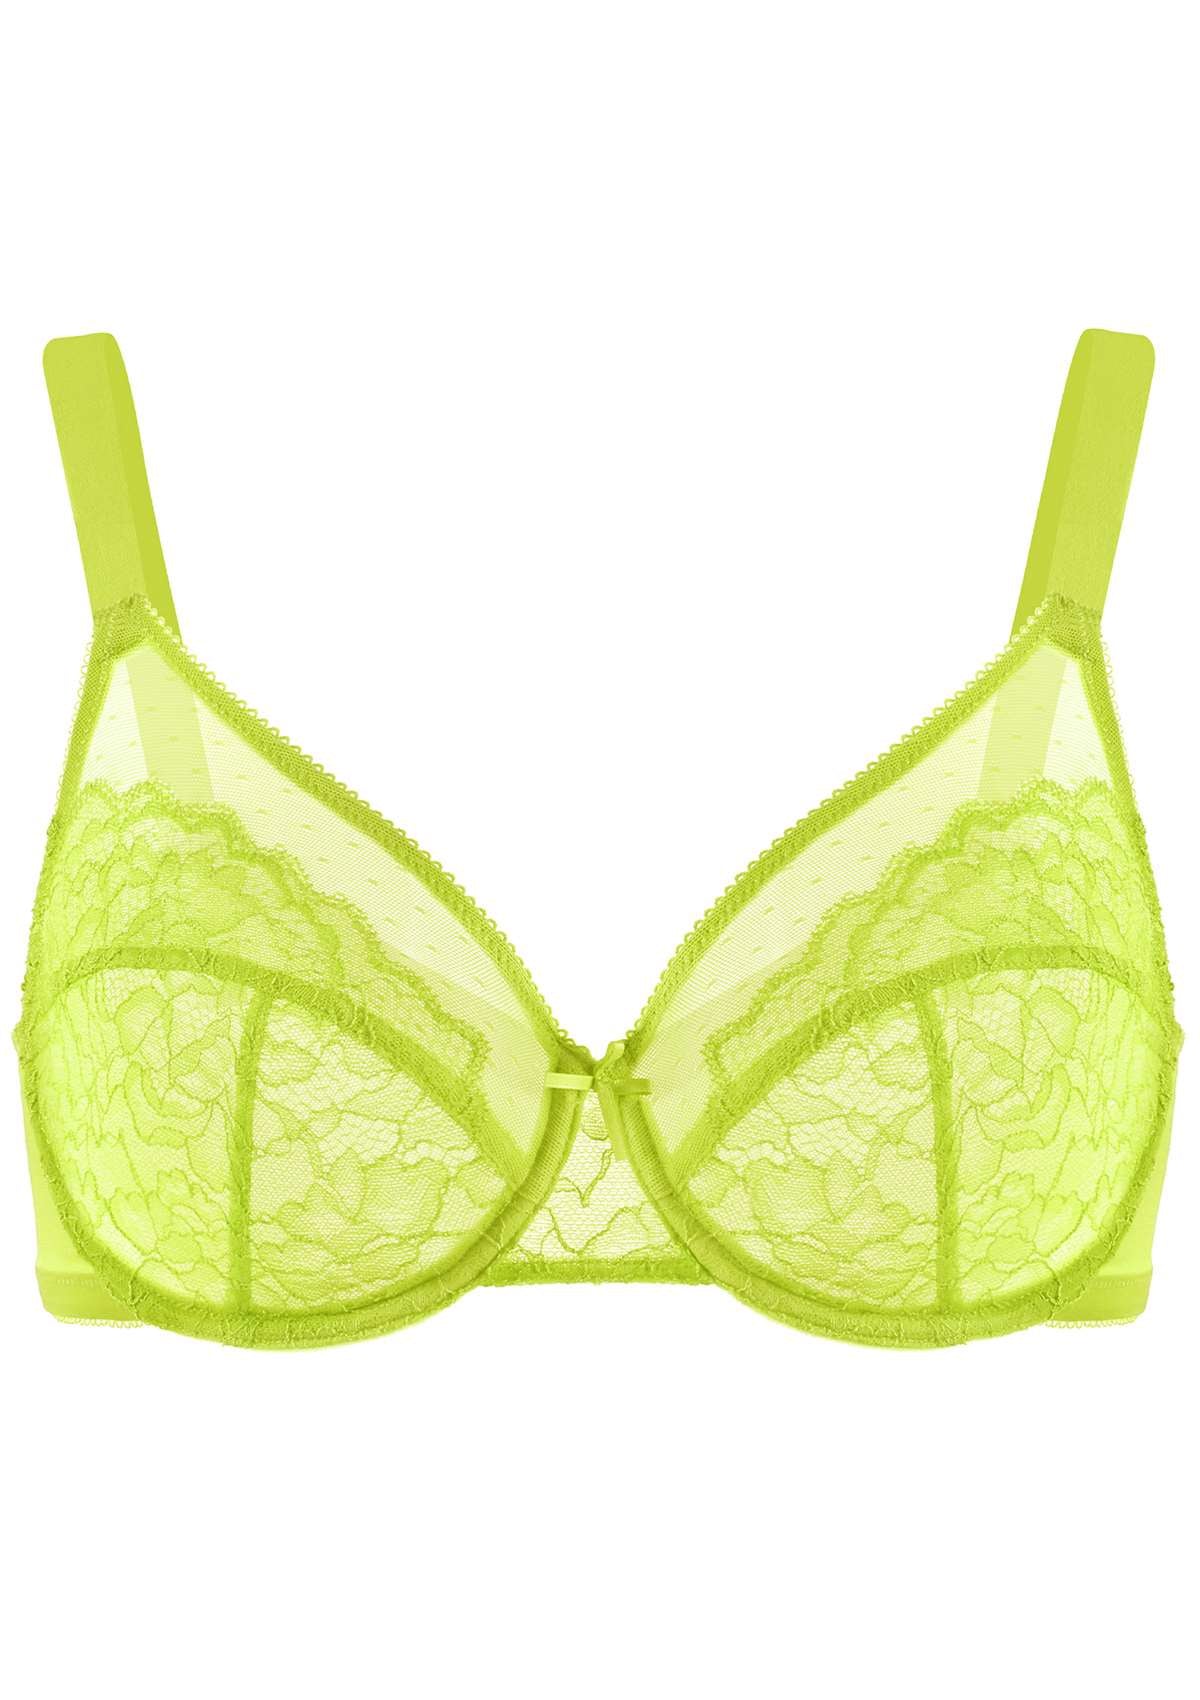 HSIA Enchante Full Cup Minimizing Bra: Supportive Unlined Lace Bra - Lime Green / 40 / D